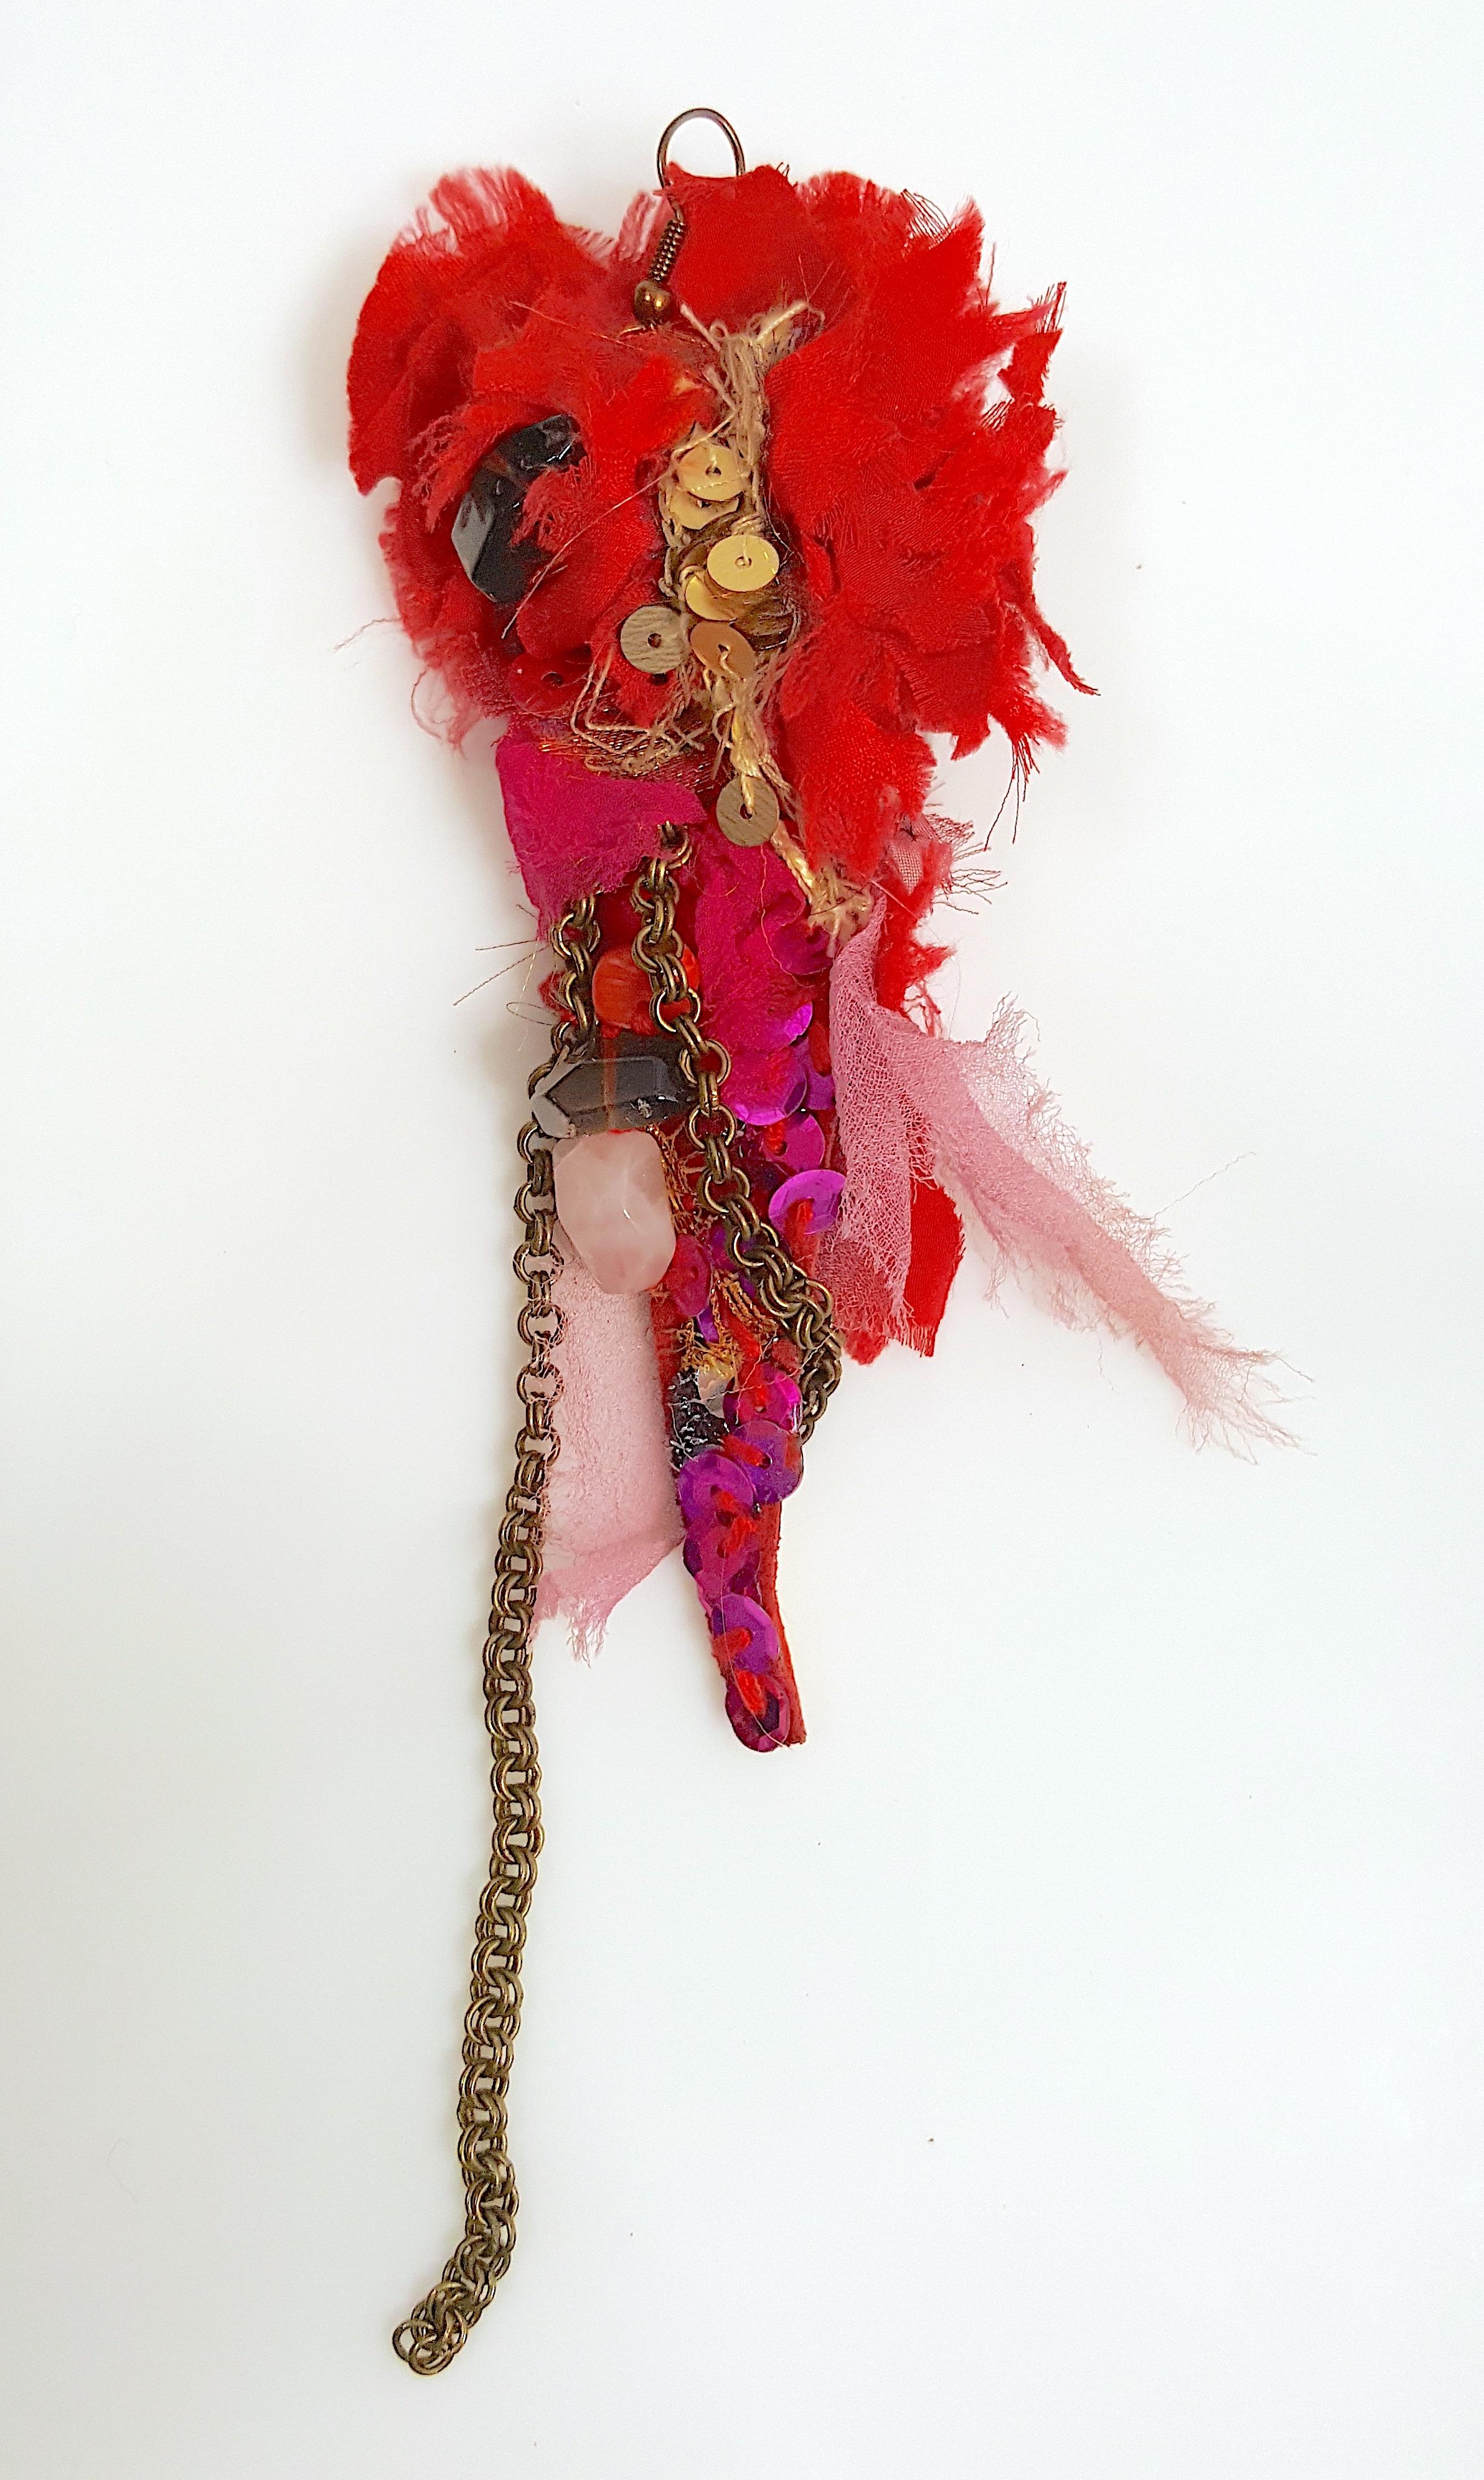 A Parisian haute-couture runway accessory designer for French Jean-Paul Gautier handmade this decadent street-culture-inspired wire-hook earring with multiple tumbled semi-precious stones, gilt chain and cord, and multi-color sequins that suggest